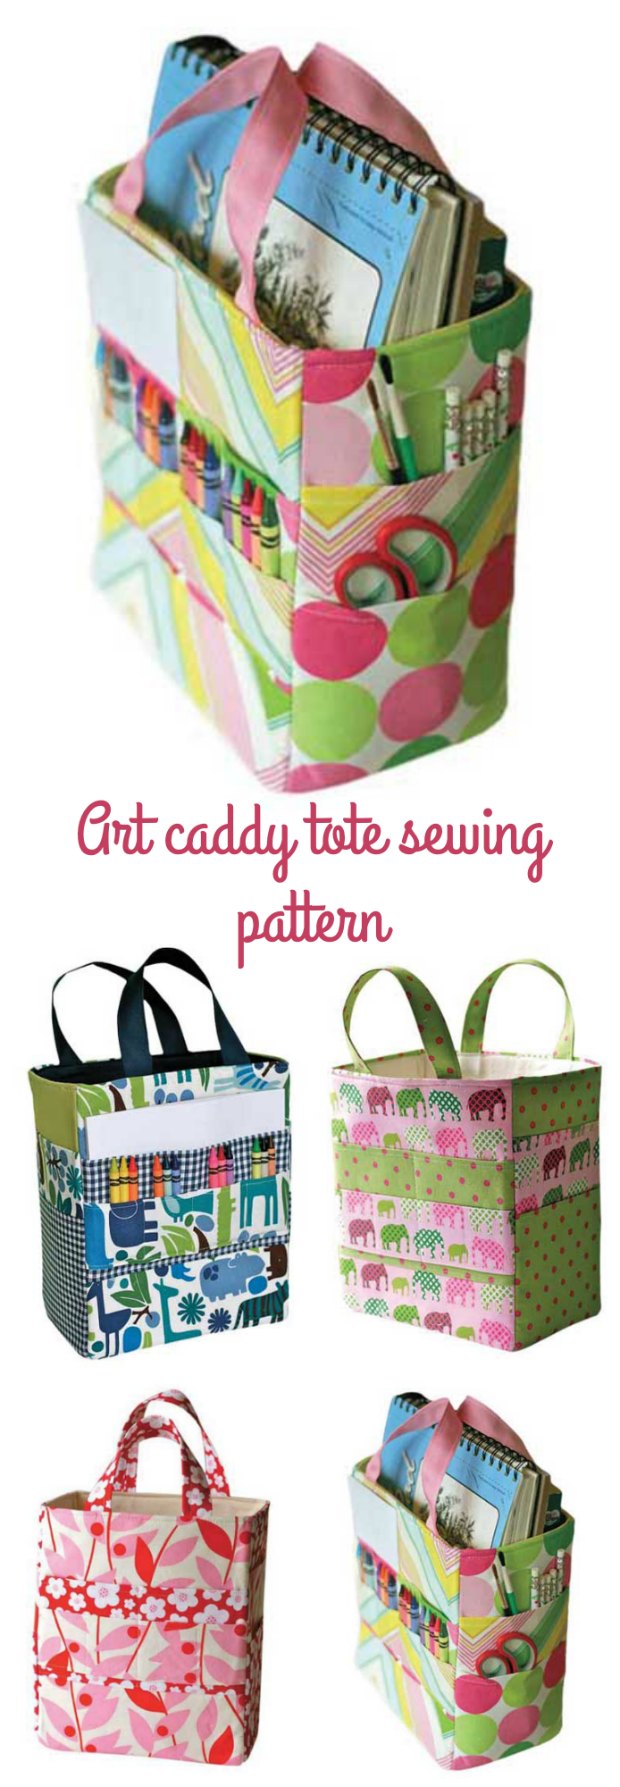 Sewing pattern for this art tote bag for all your drawing, painting and crafting supplies.